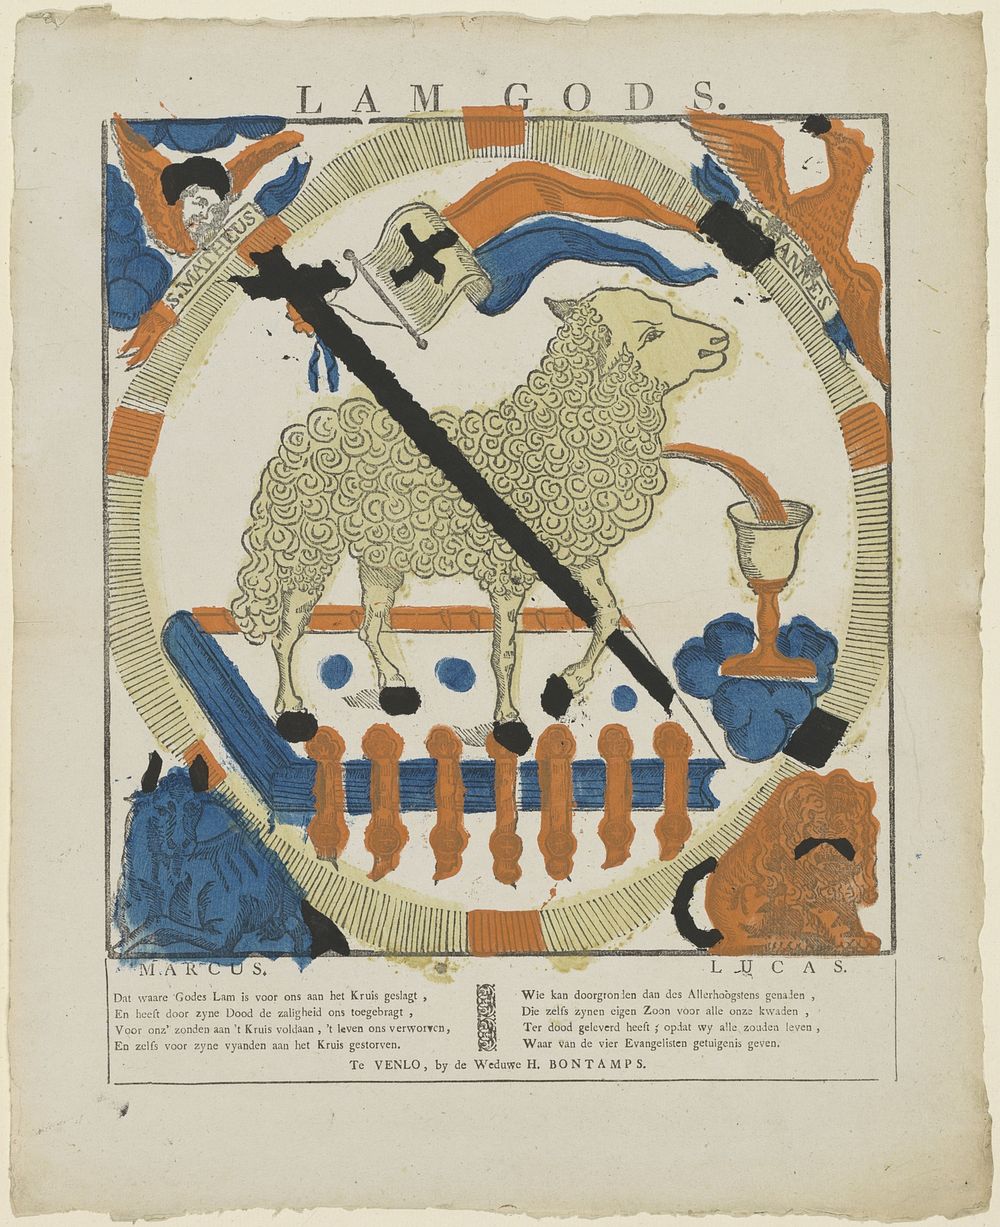 Lam Gods (1779 - 1936) by weduwe H Bontamps and anonymous